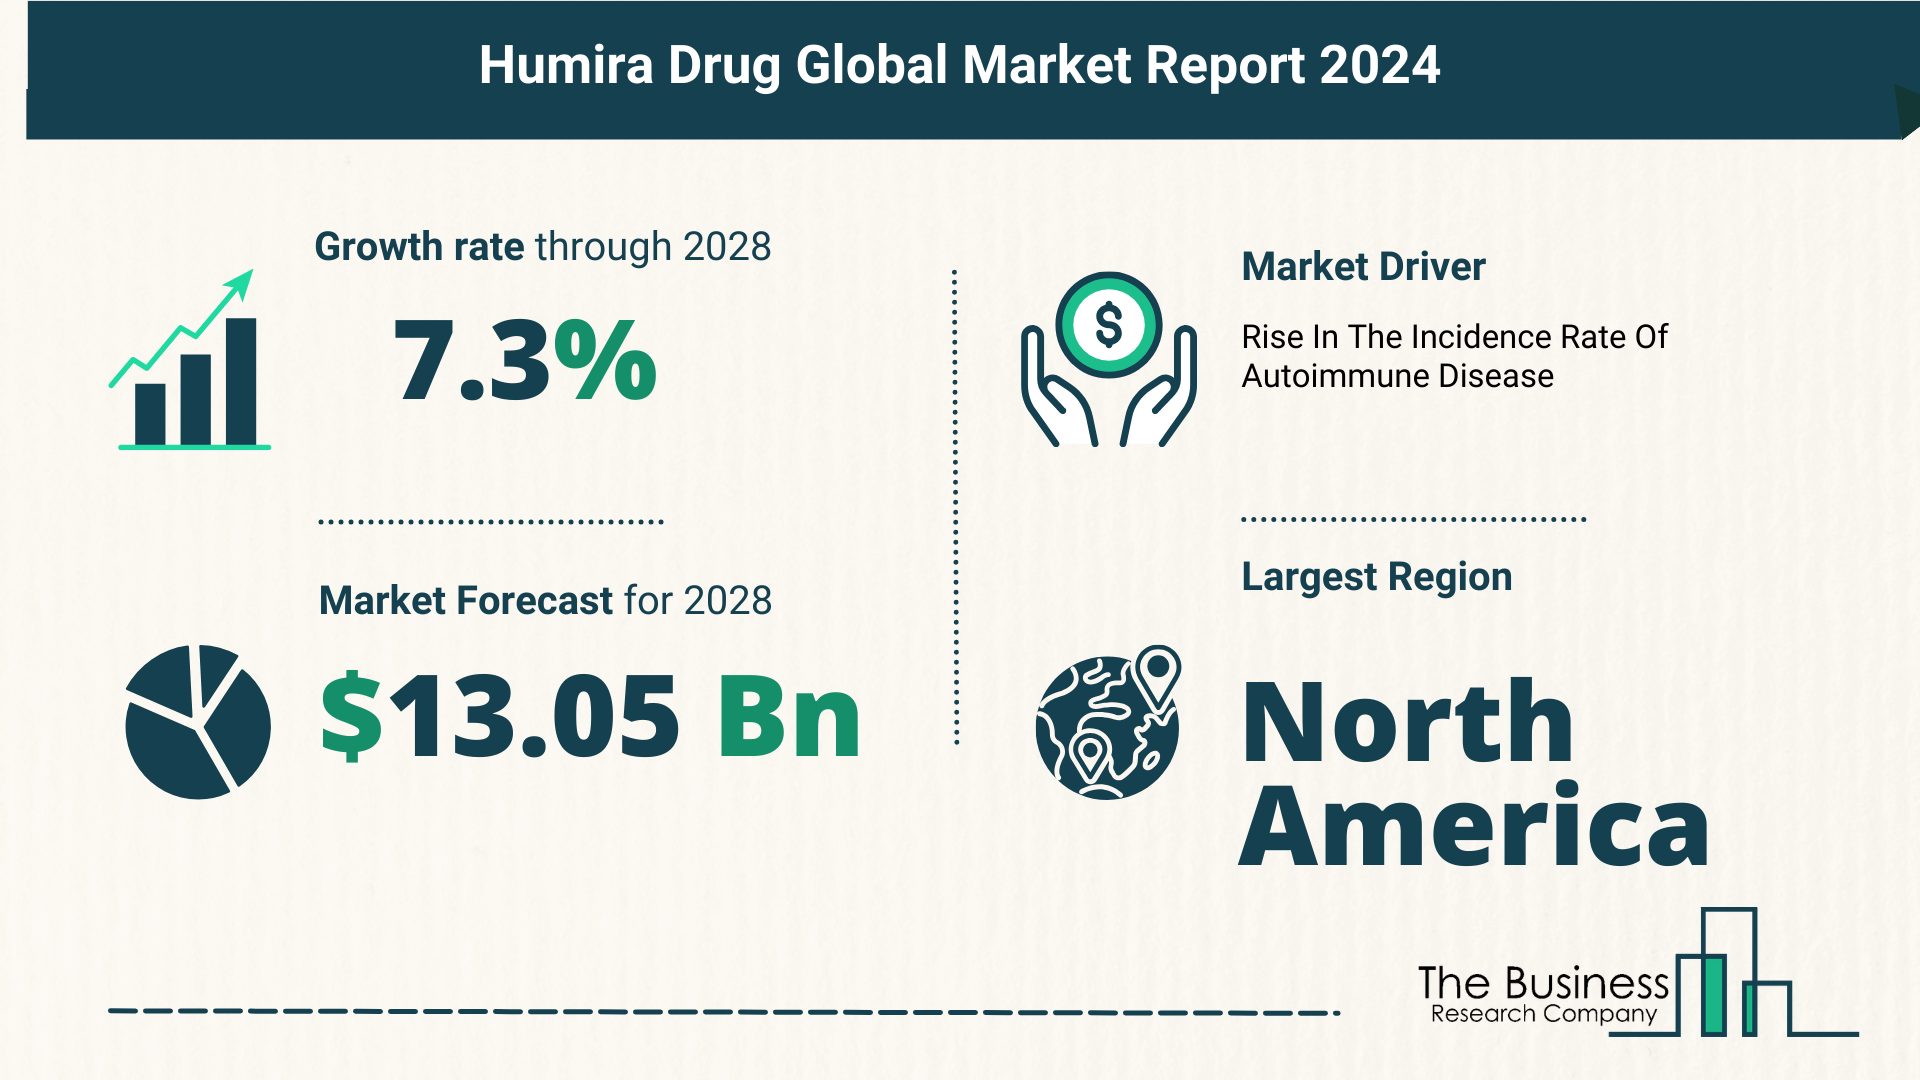 Key Insights On The Humira Drug Market 2024 – Size, Driver, And Major Players